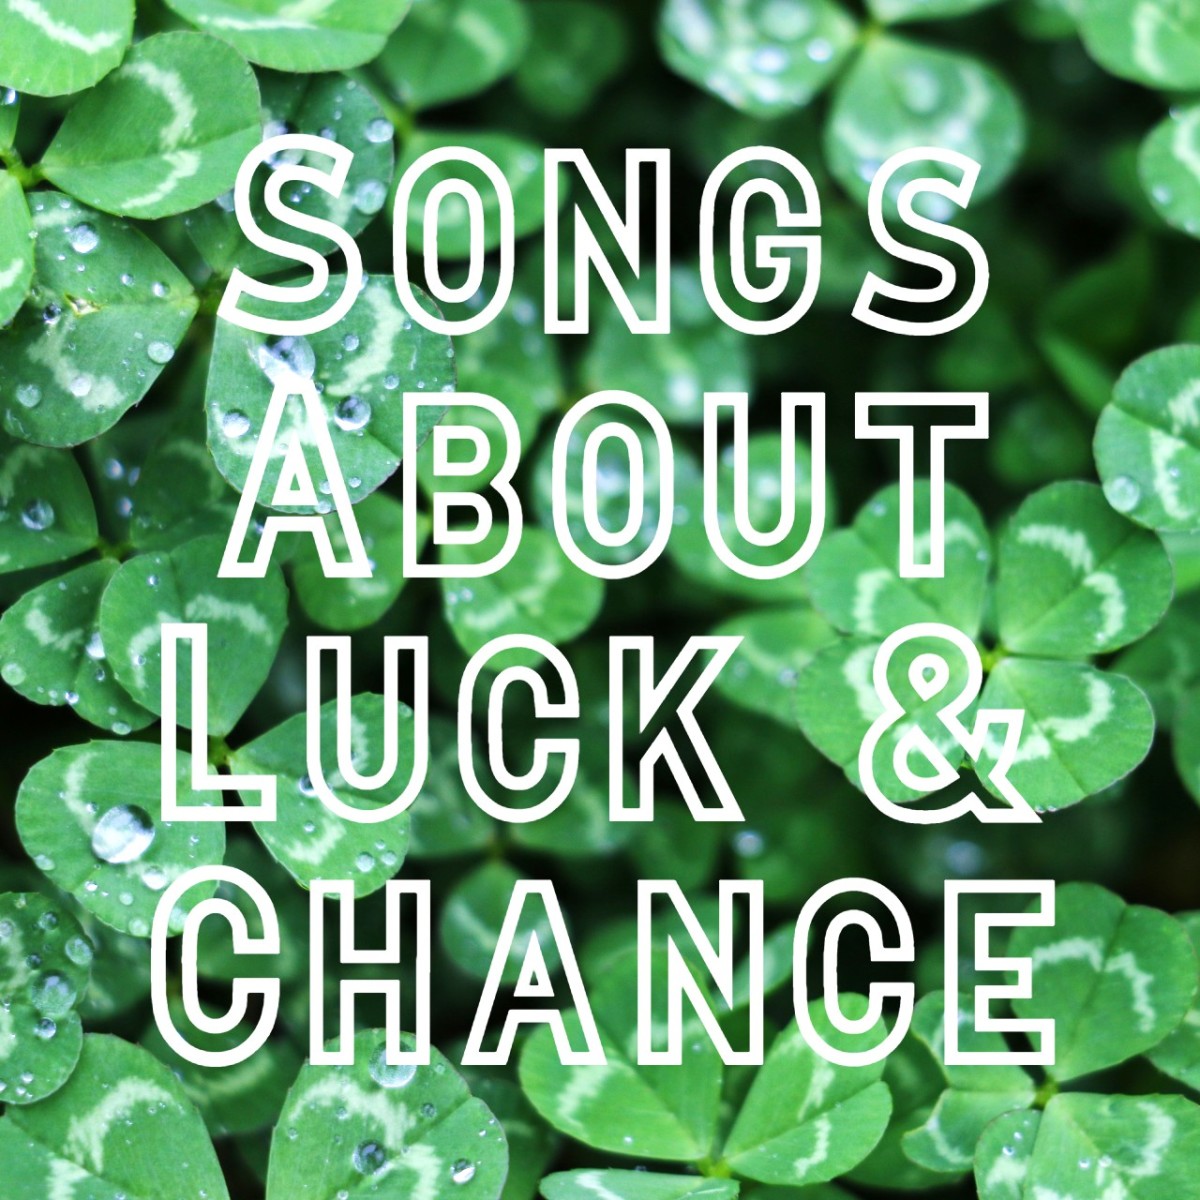 May the odds be ever in your favor.  Are you lucky in love? Just plain lucky? Or wishing that better luck would come your way? Celebrate luck and chance with a playlist of rock, pop, country & R&B songs.